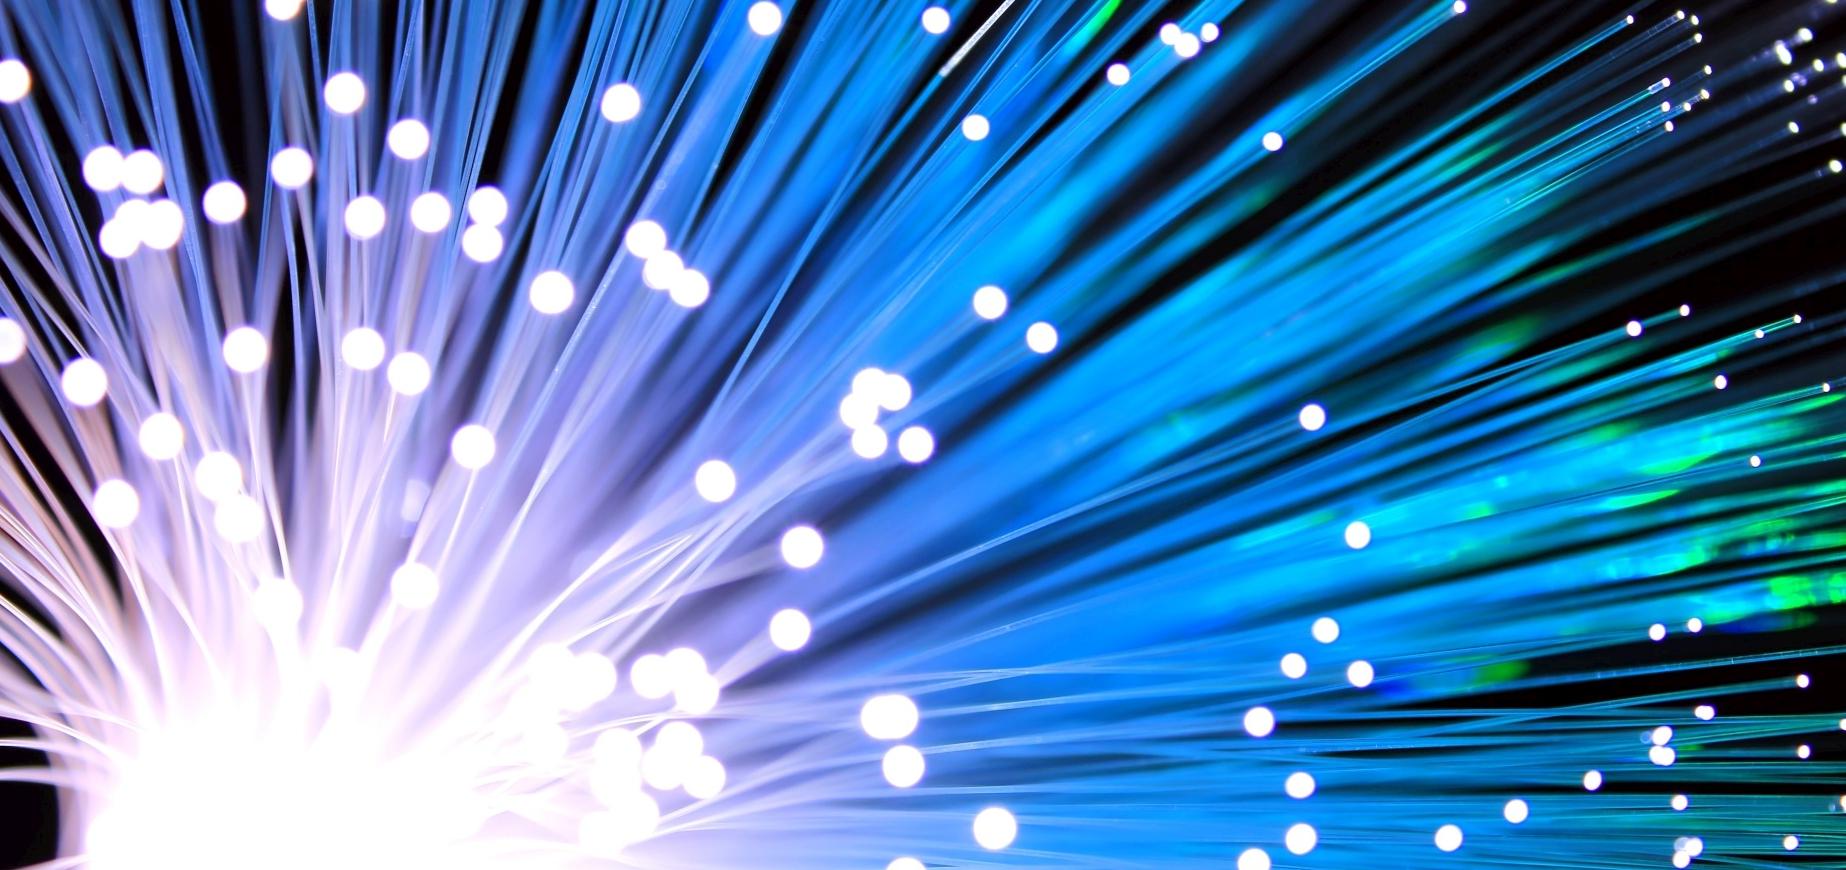 background image of fiber optic cables